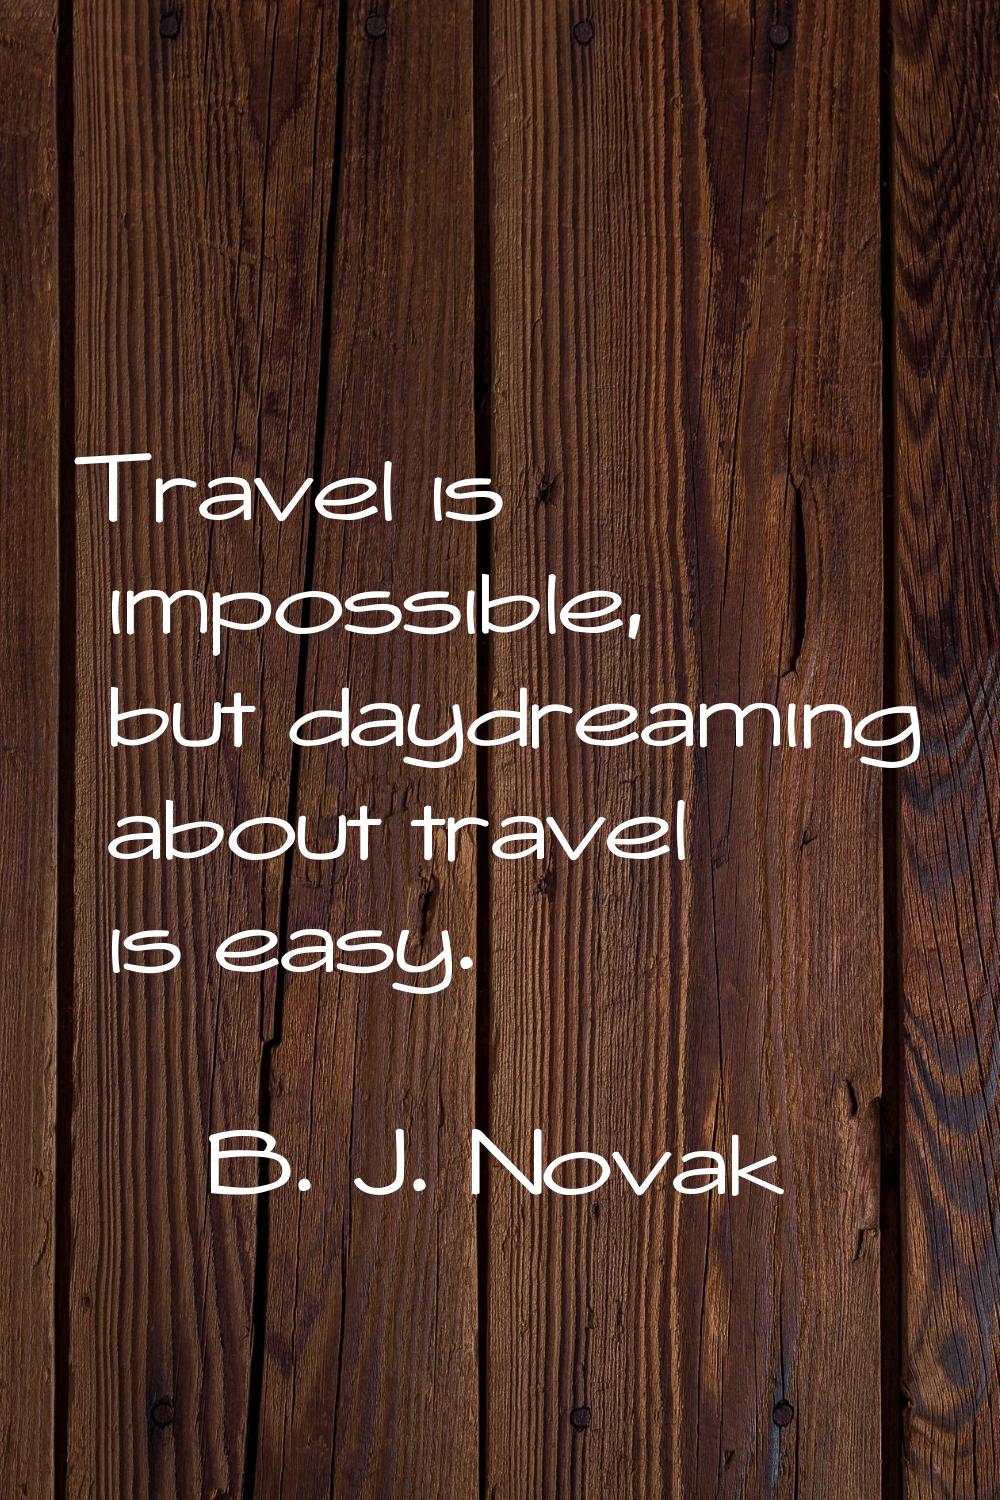 Travel is impossible, but daydreaming about travel is easy.